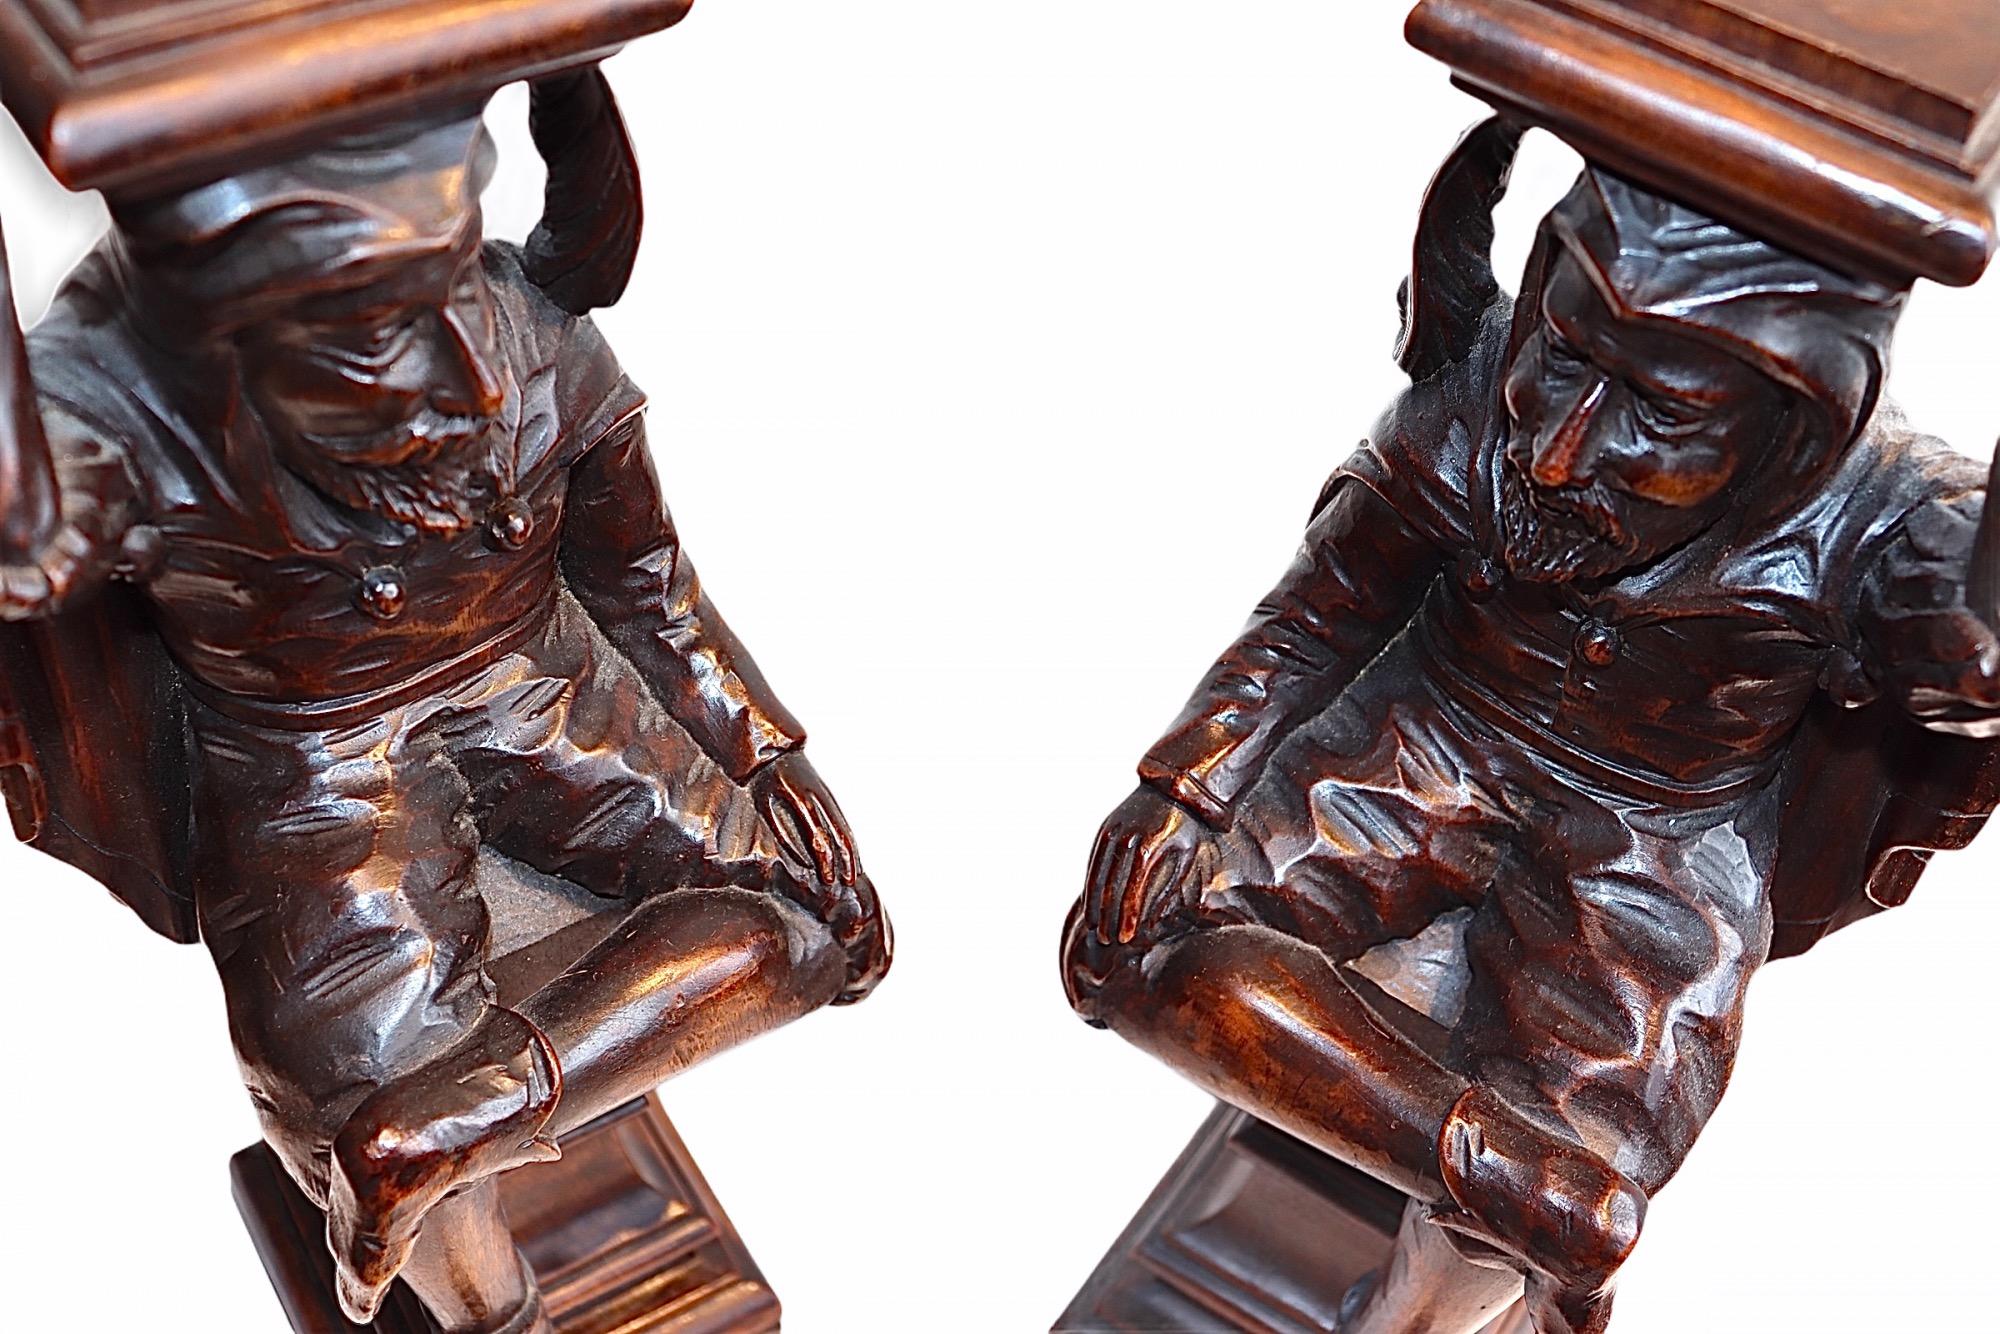 Pair of English Carved Walnut Wood Figures of Court Jesters, 18th Century For Sale 3